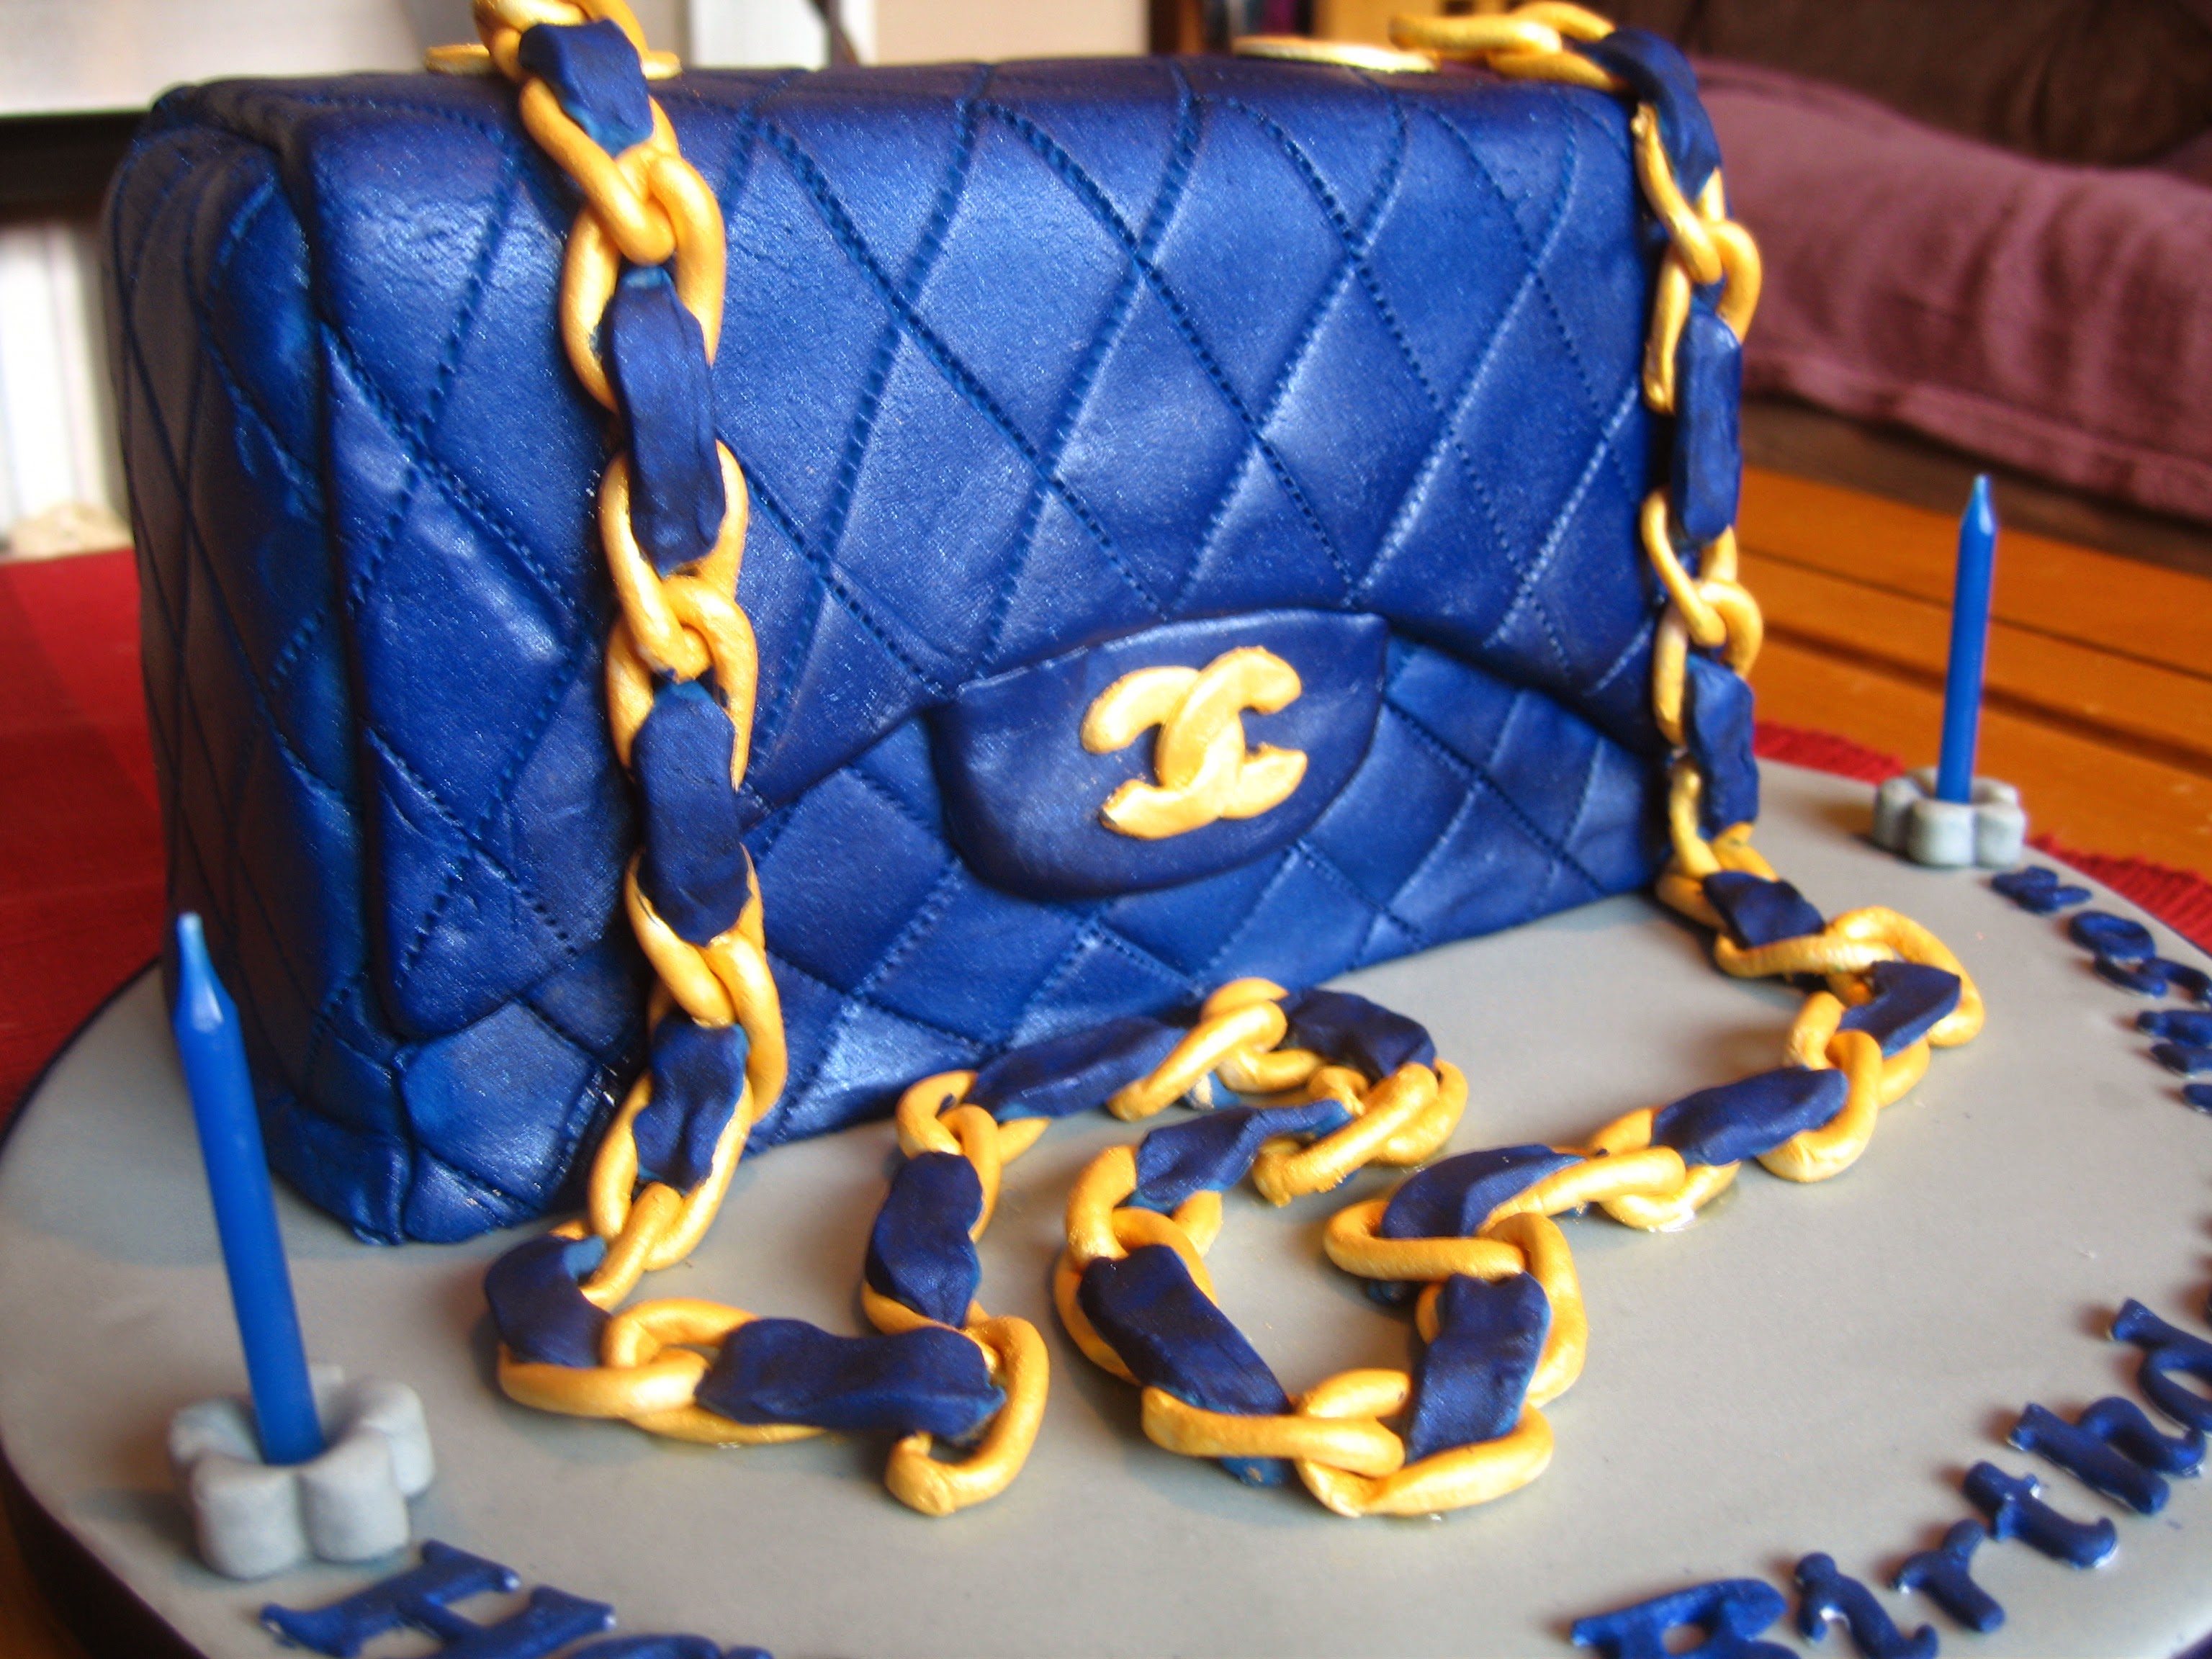 Chanel Bag Cake - Celestial Desserts and Bakery